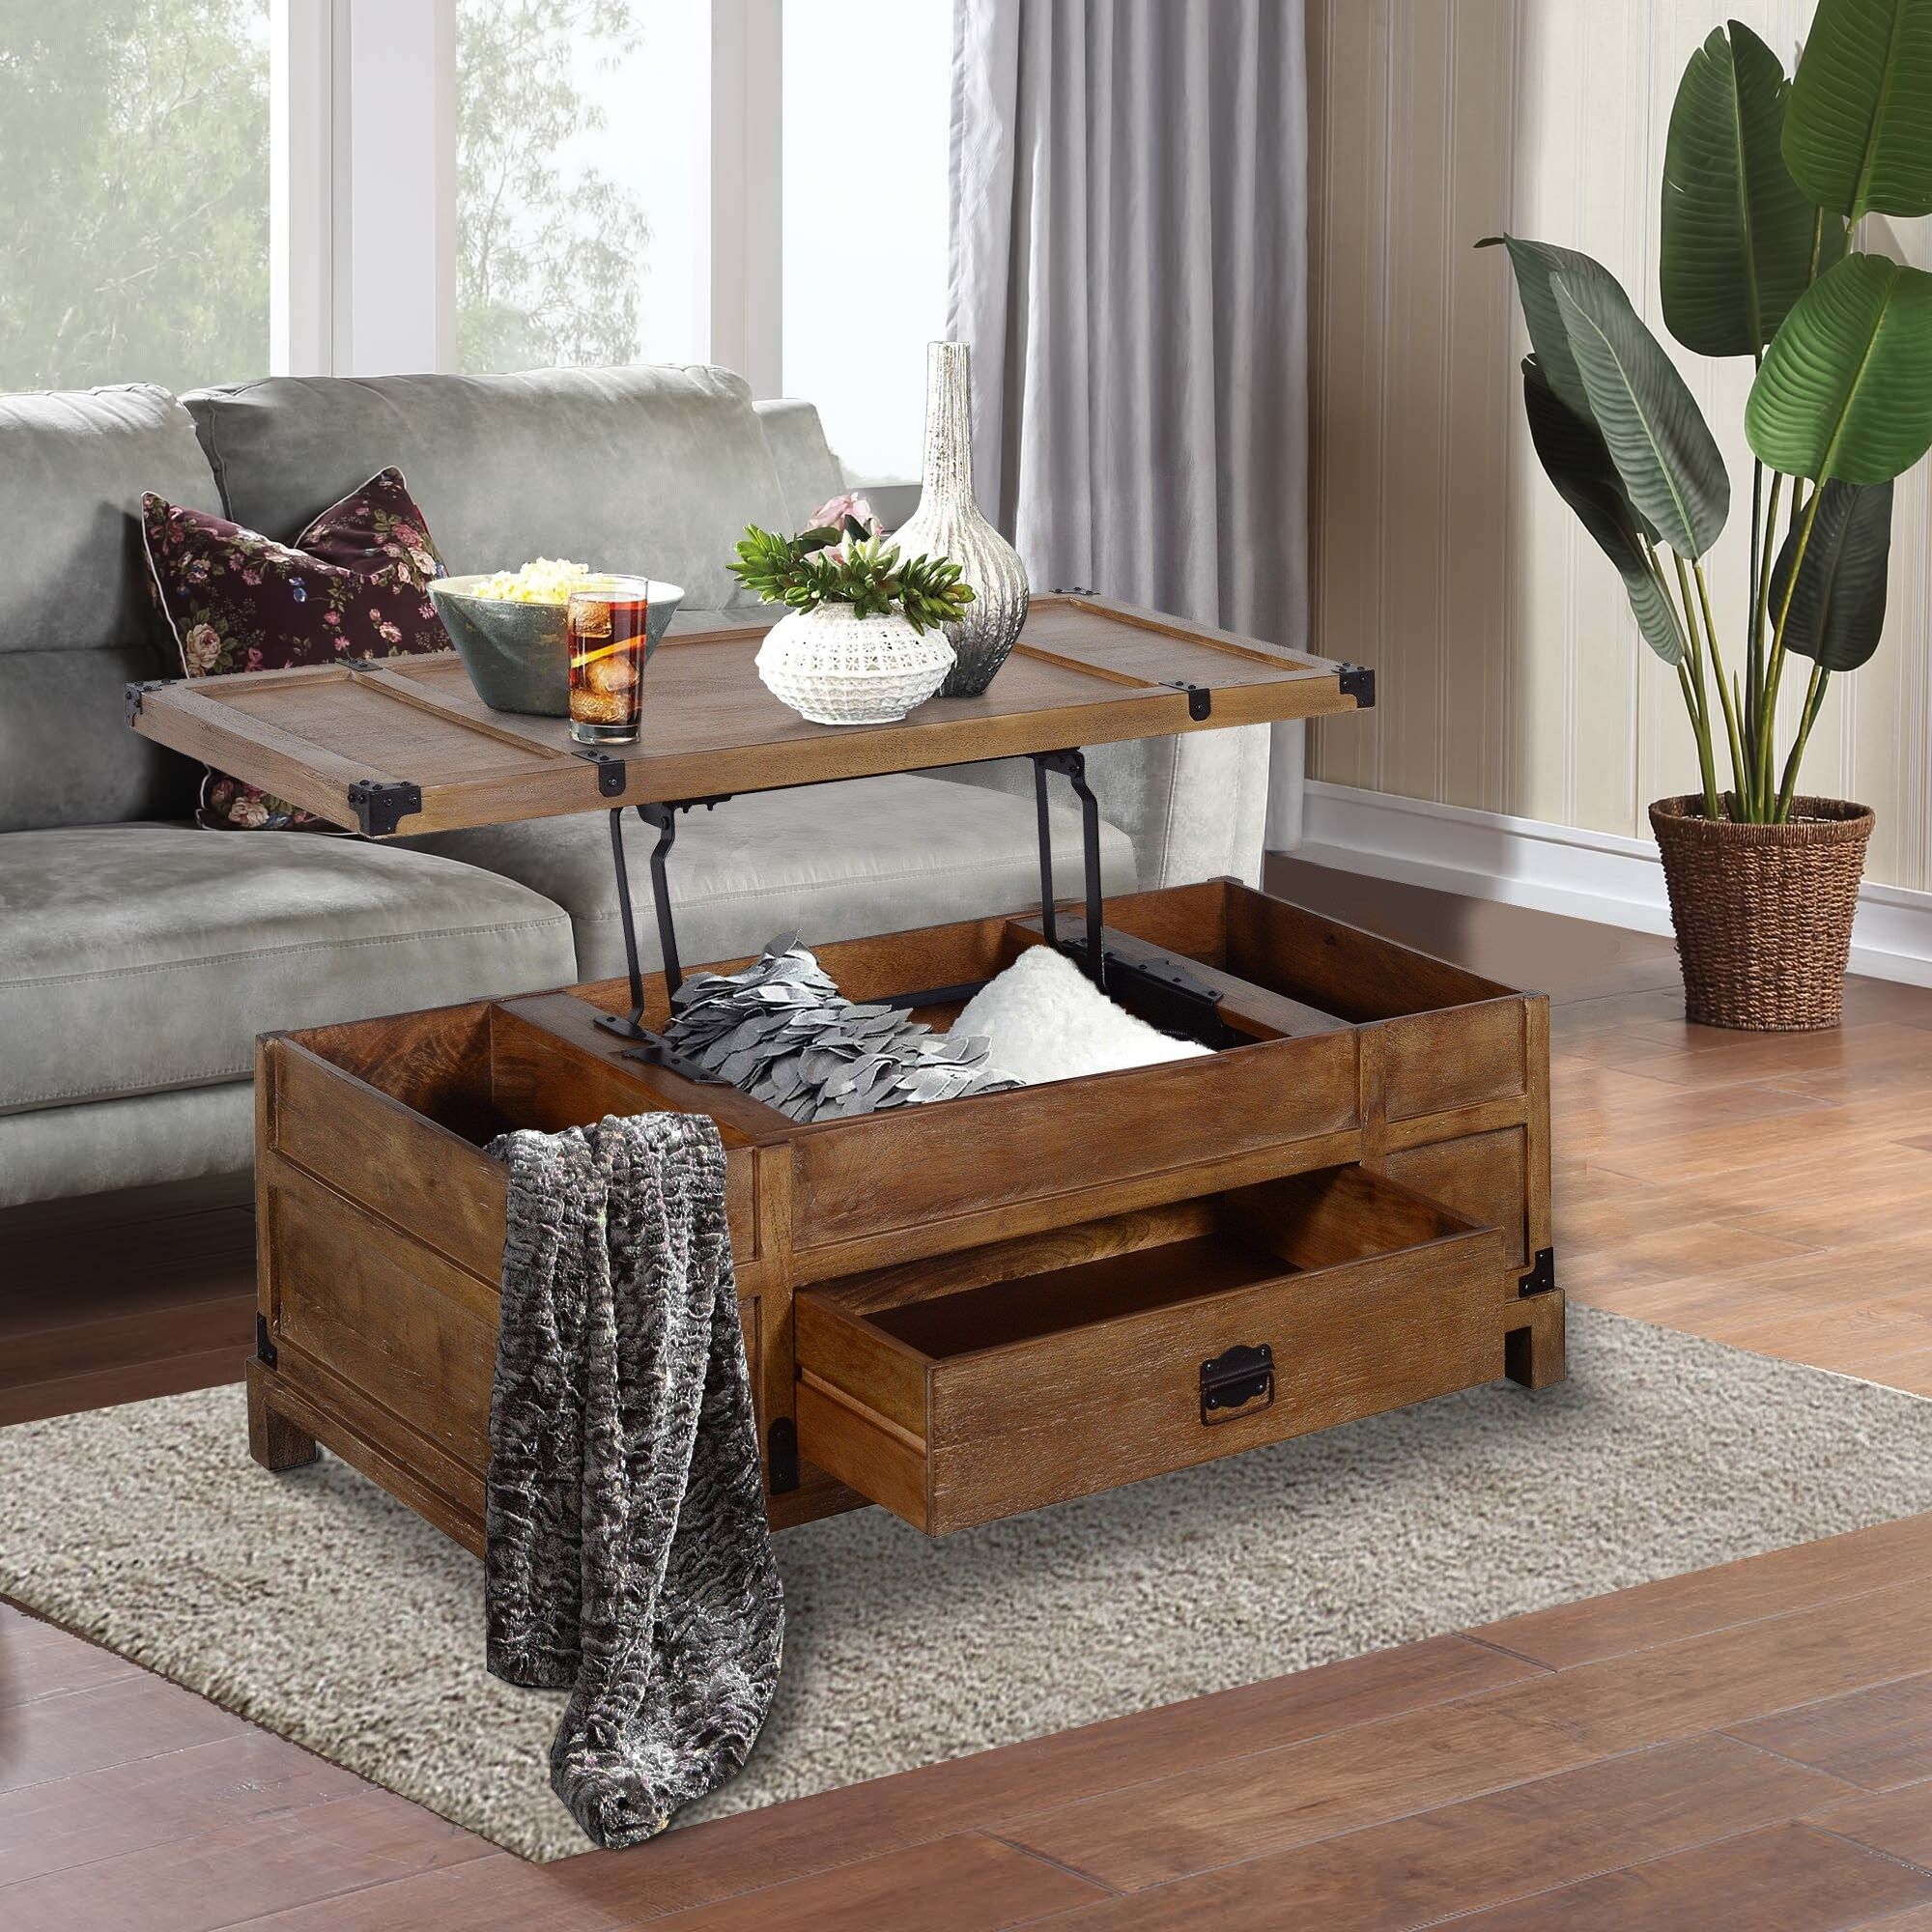 Rustic Single Drawer Mango Wood Coffee Table With Lift Top Storage &  Compartments, Brown – On Sale – Bed Bath & Beyond – 32026623 Within Lift Top Coffee Tables With Storage Drawers (View 6 of 15)